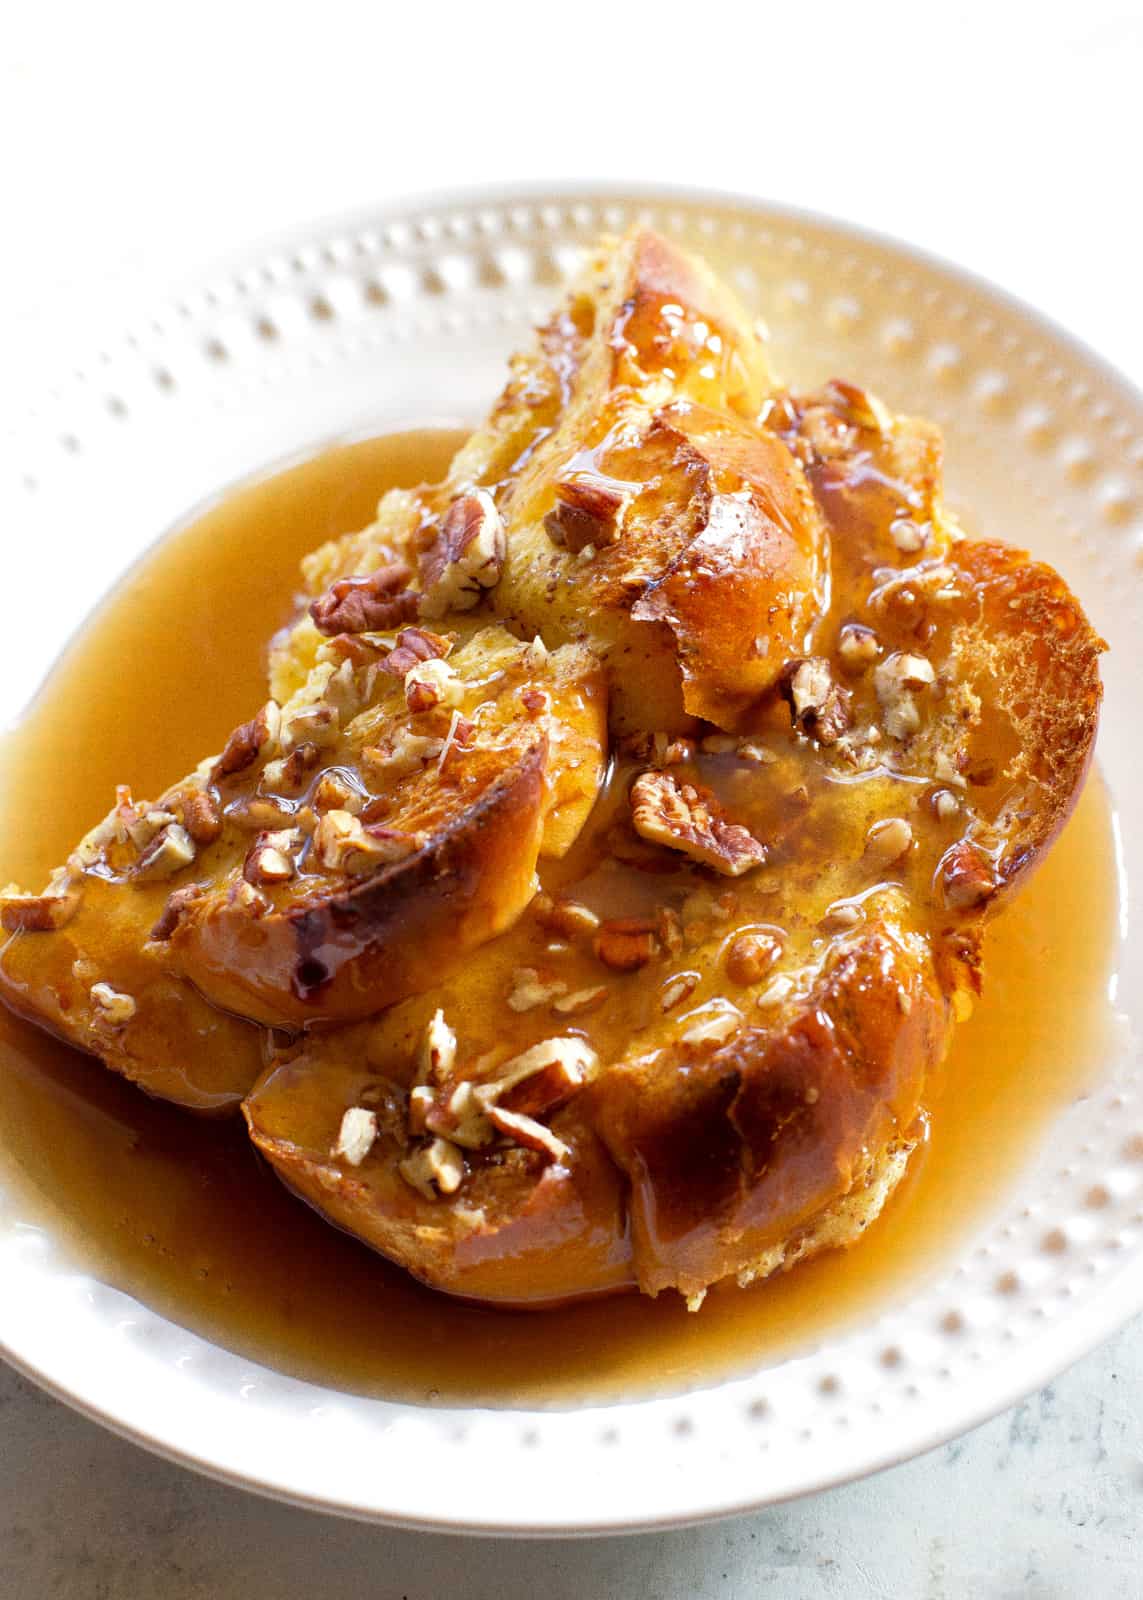 Caramelized Sheet-Pan French Toast Recipe - NYT Cooking